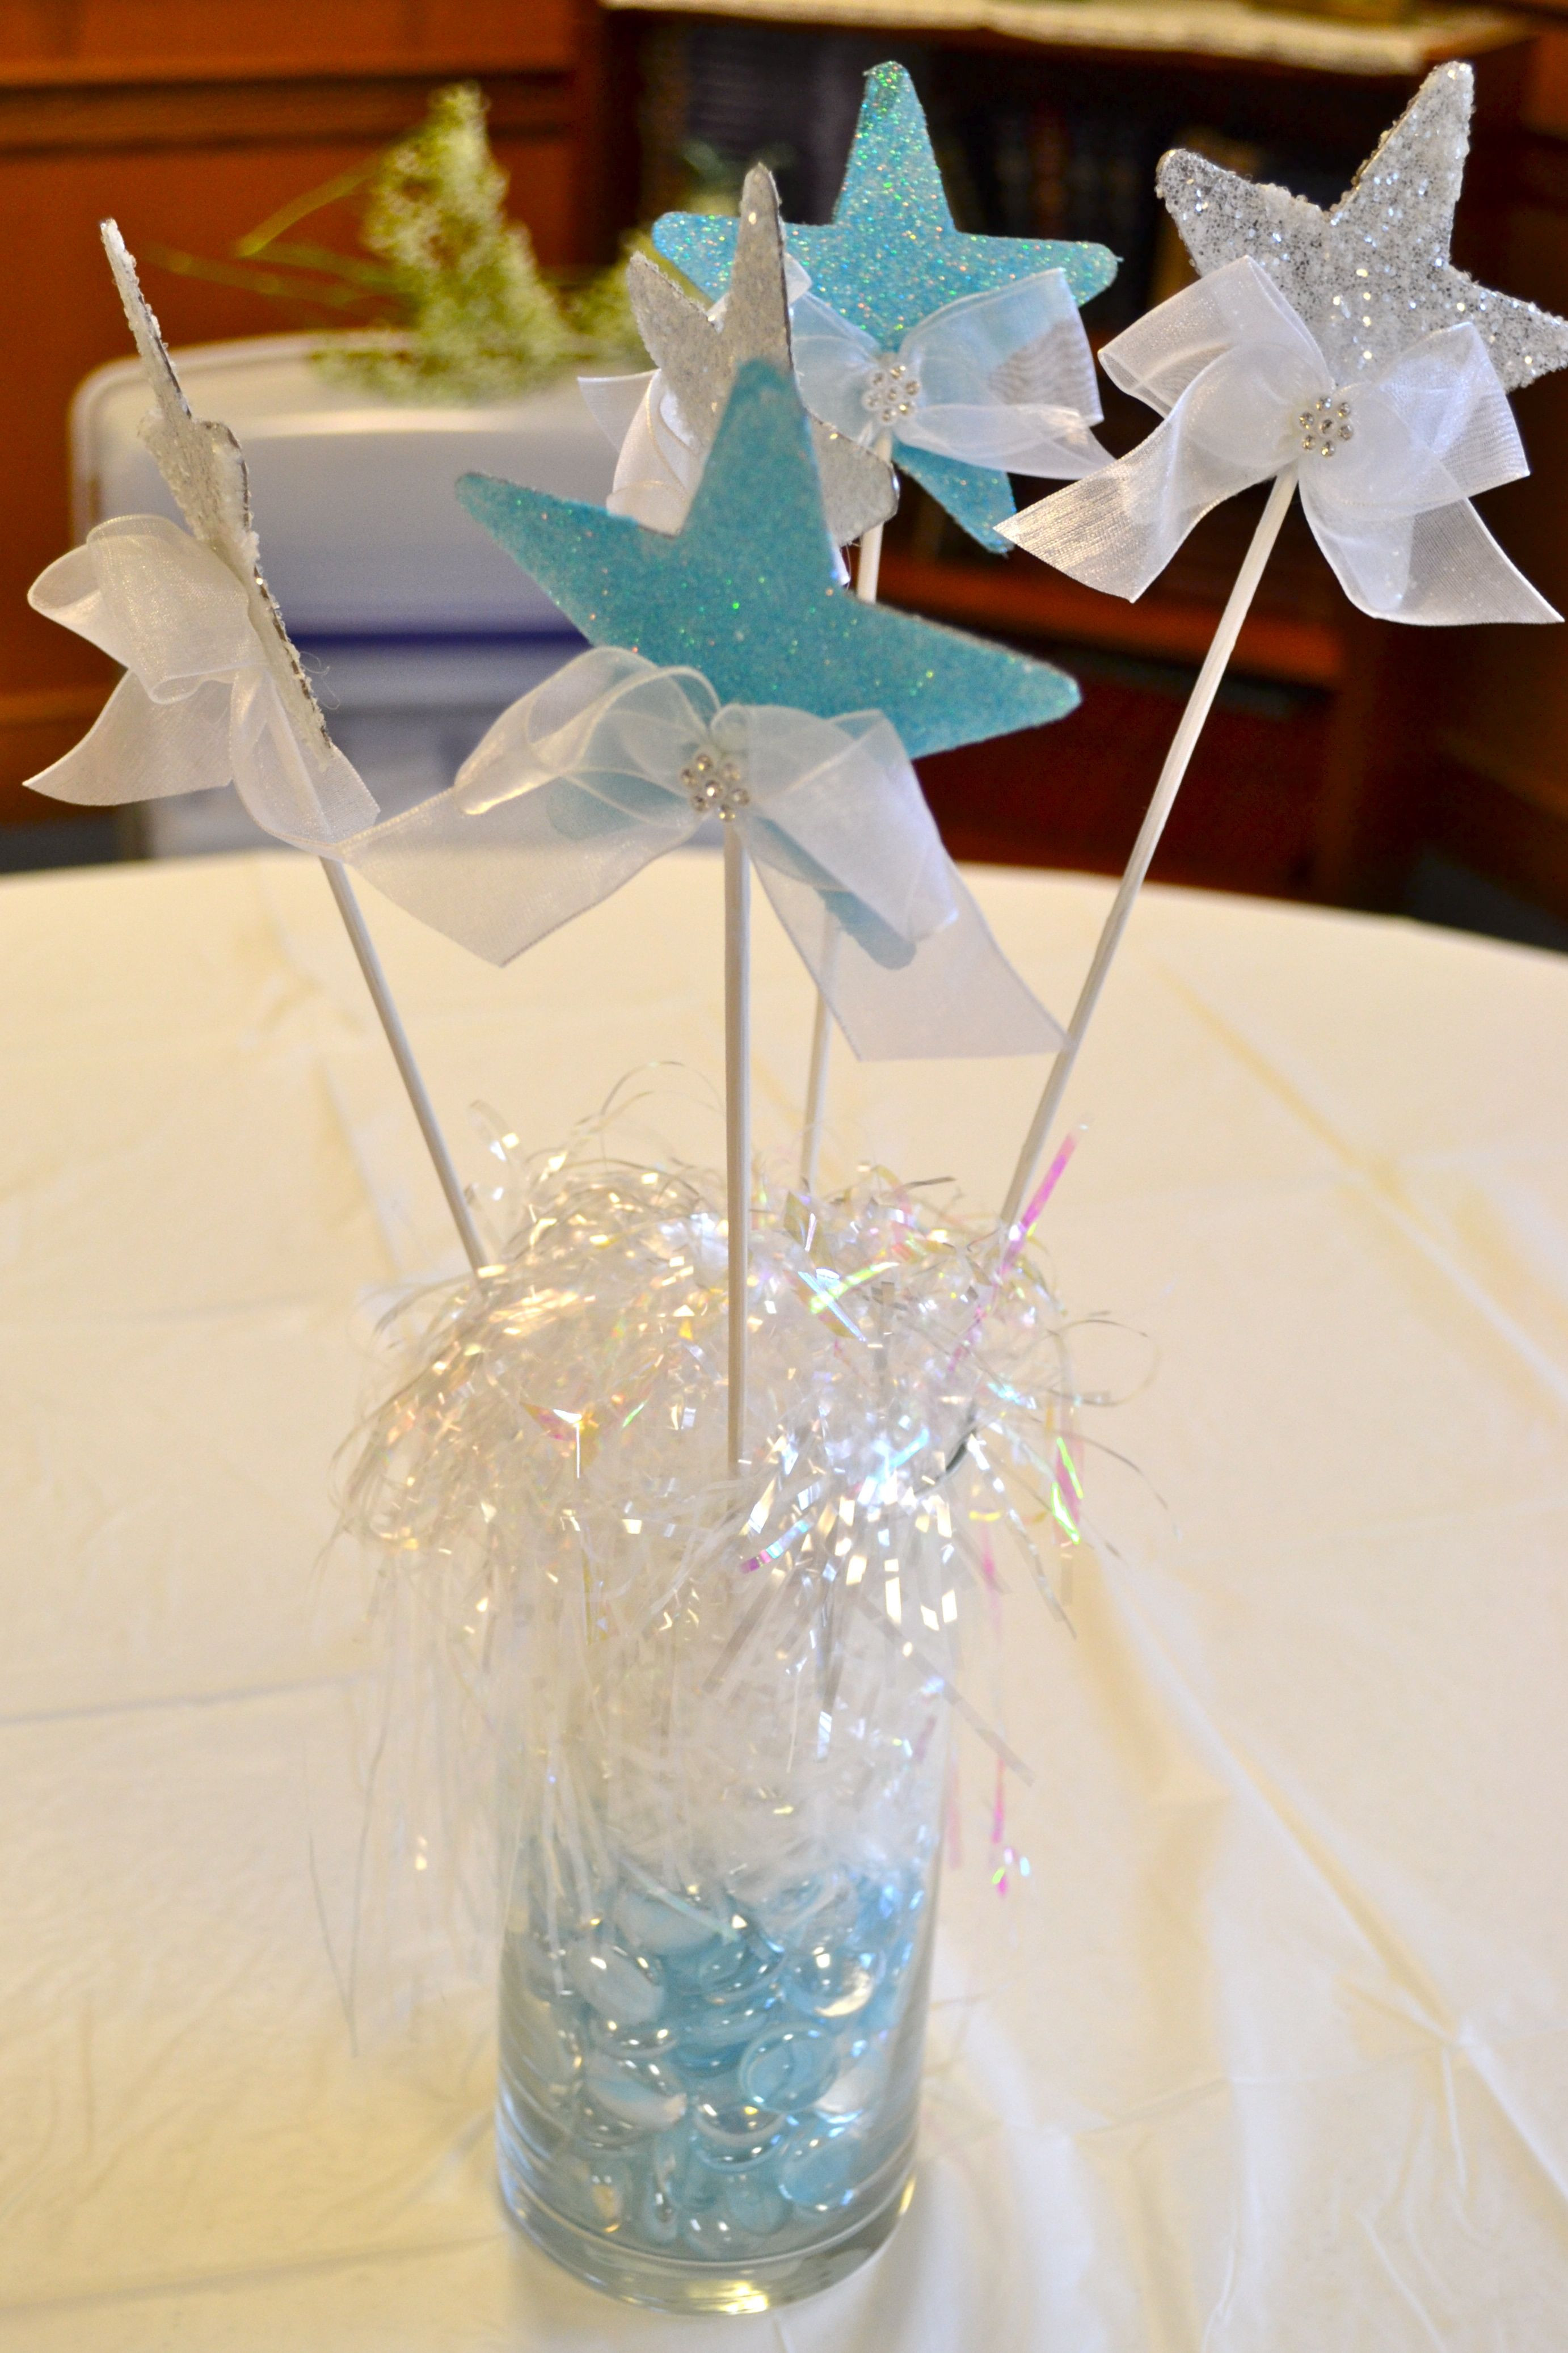 24 Stylish Three Vase Centerpiece 2022 free download three vase centerpiece of little star centerpieces empty glass vase filled with silver intended for little star centerpieces empty glass vase filled with silver white and blue shiny stuff at